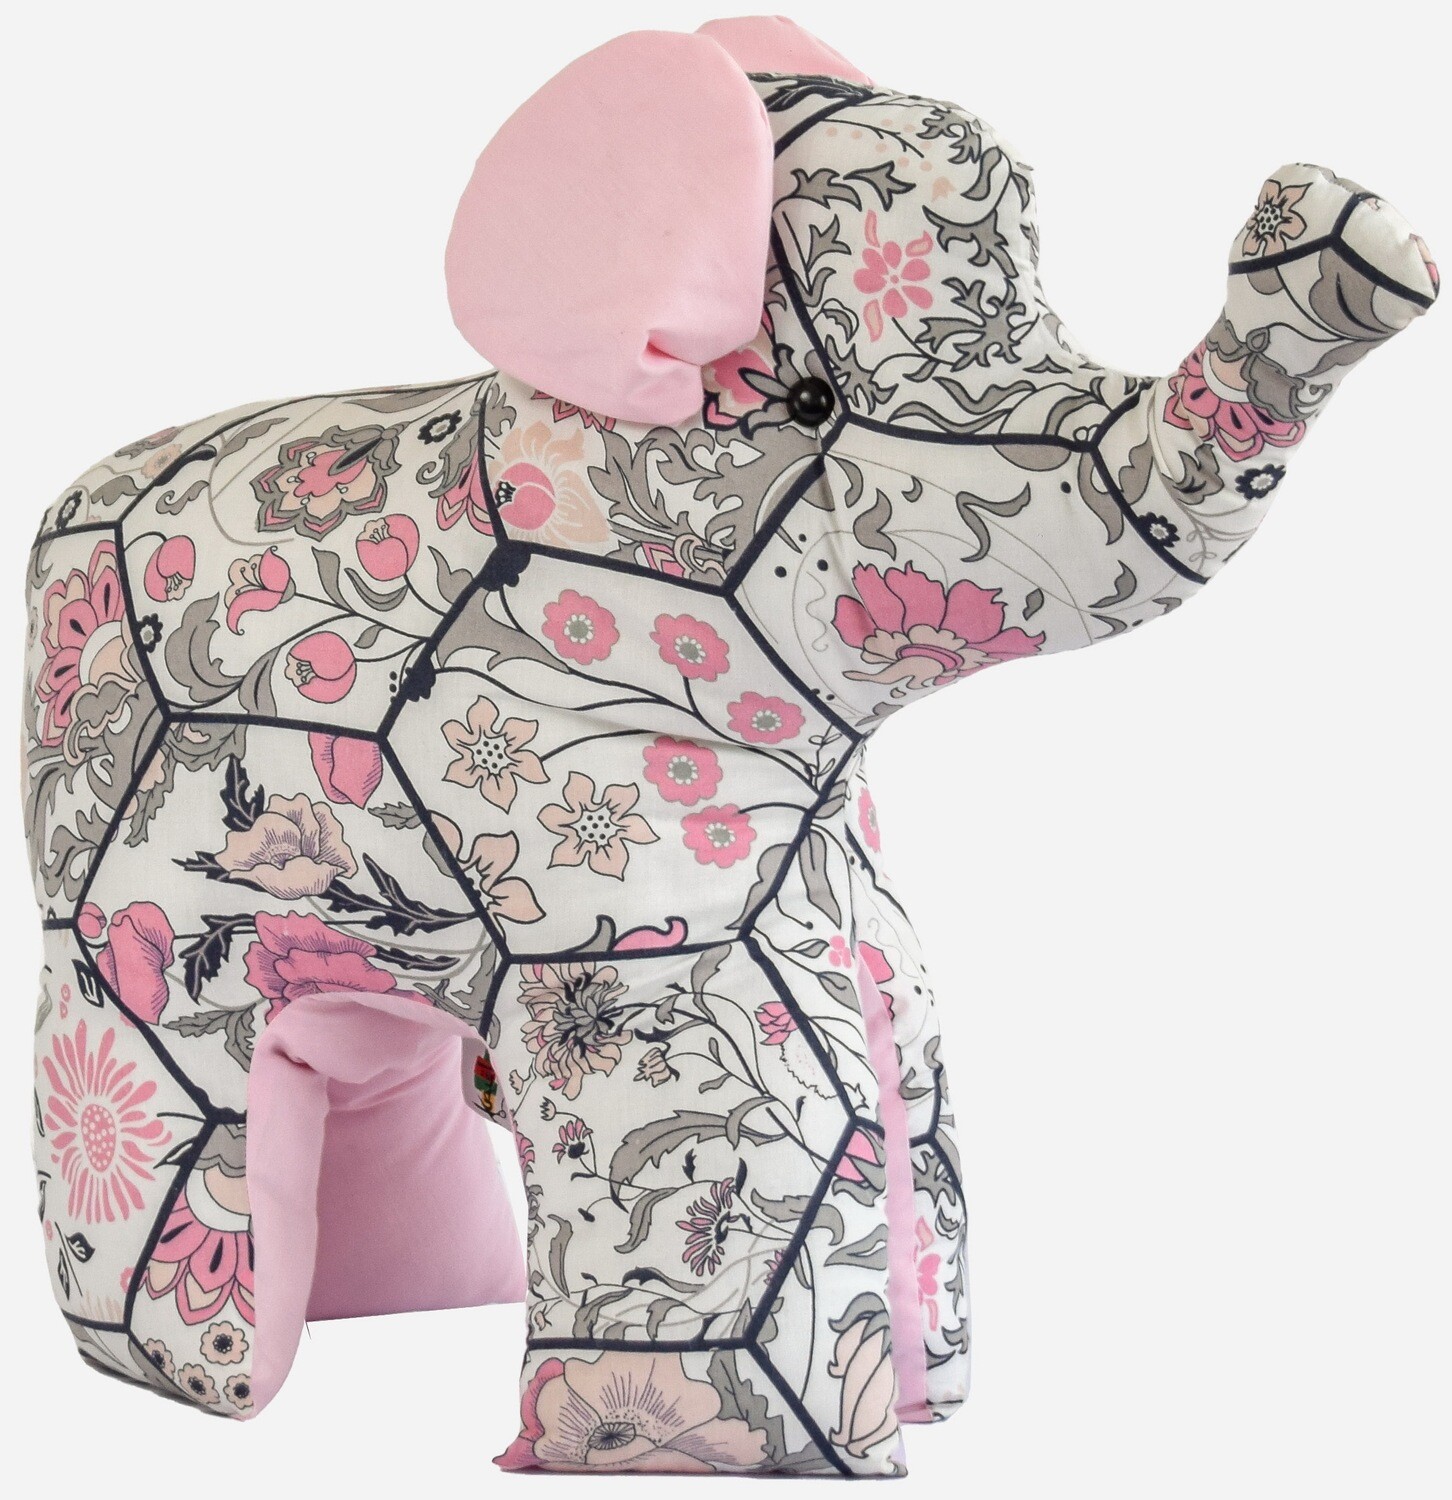 Floral print Elephant with pink ears, Large